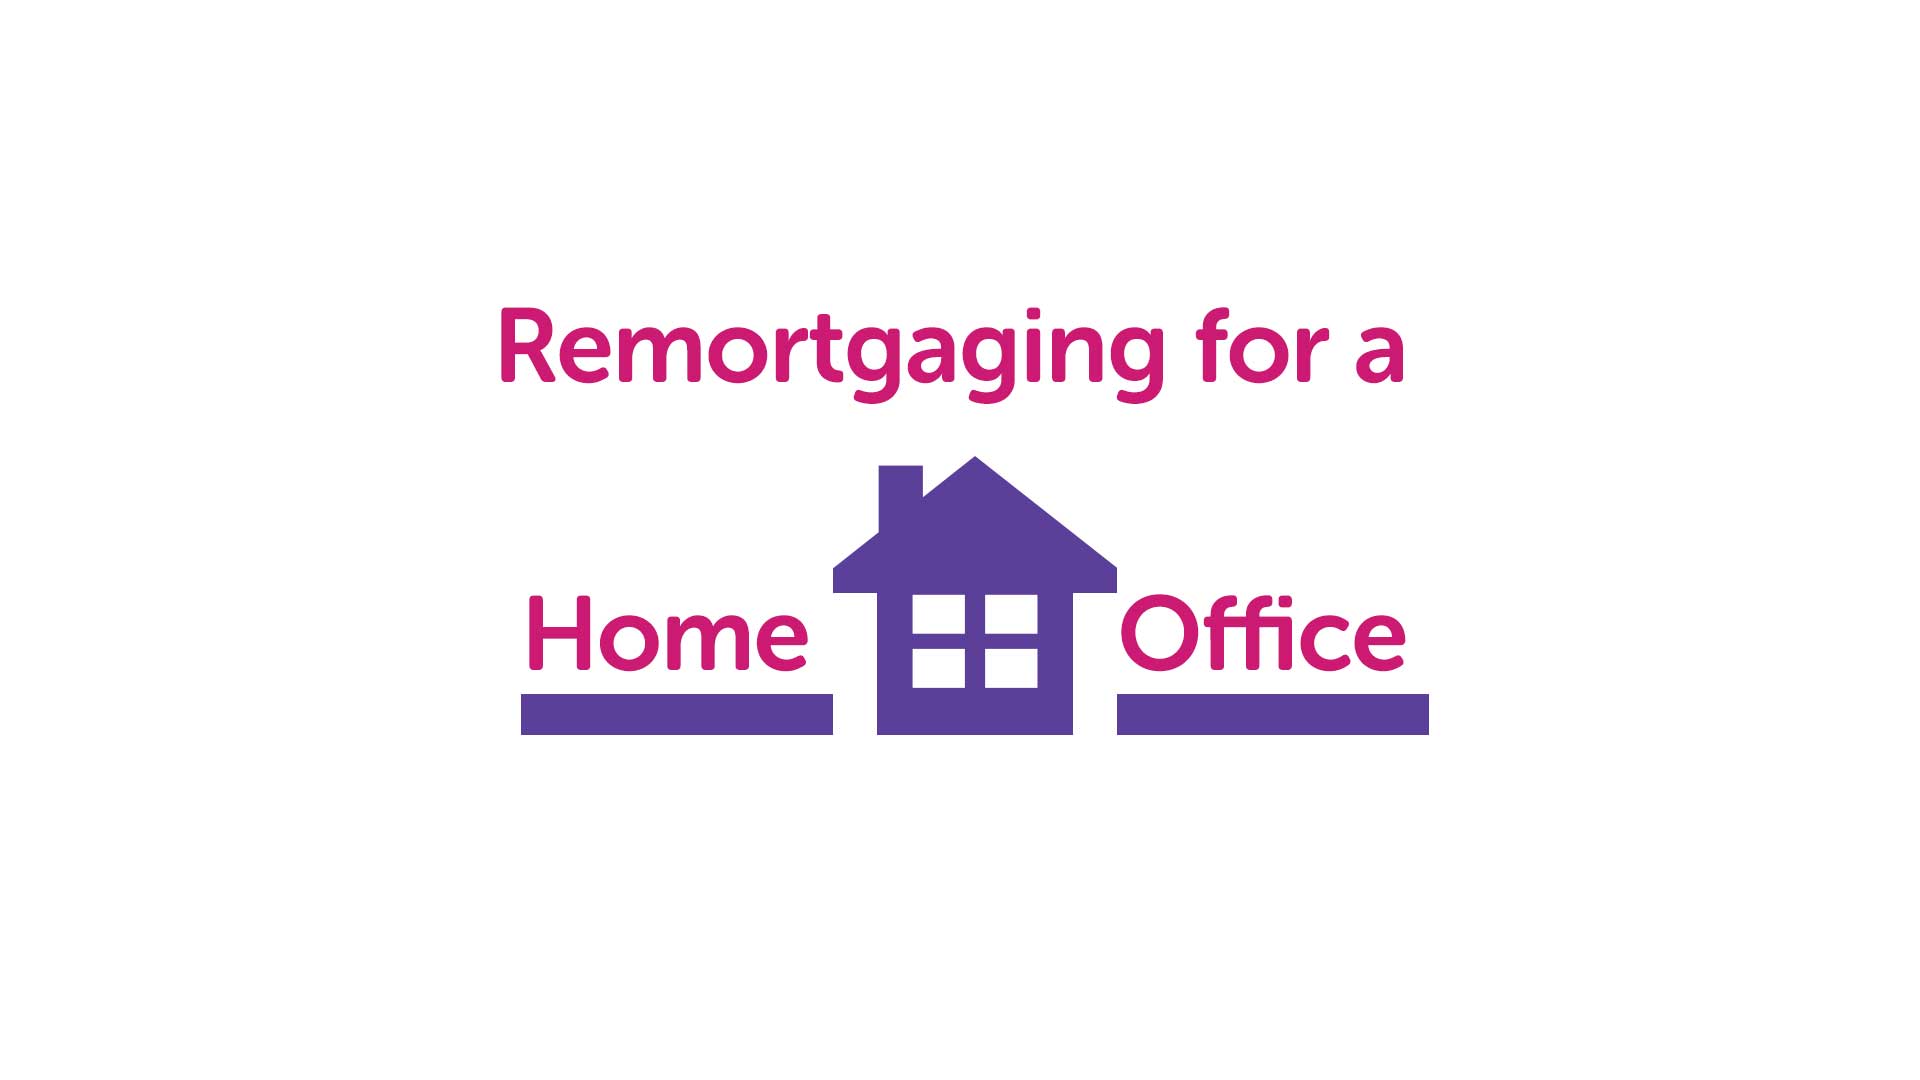 Remortgage for a Home Office in Manchester